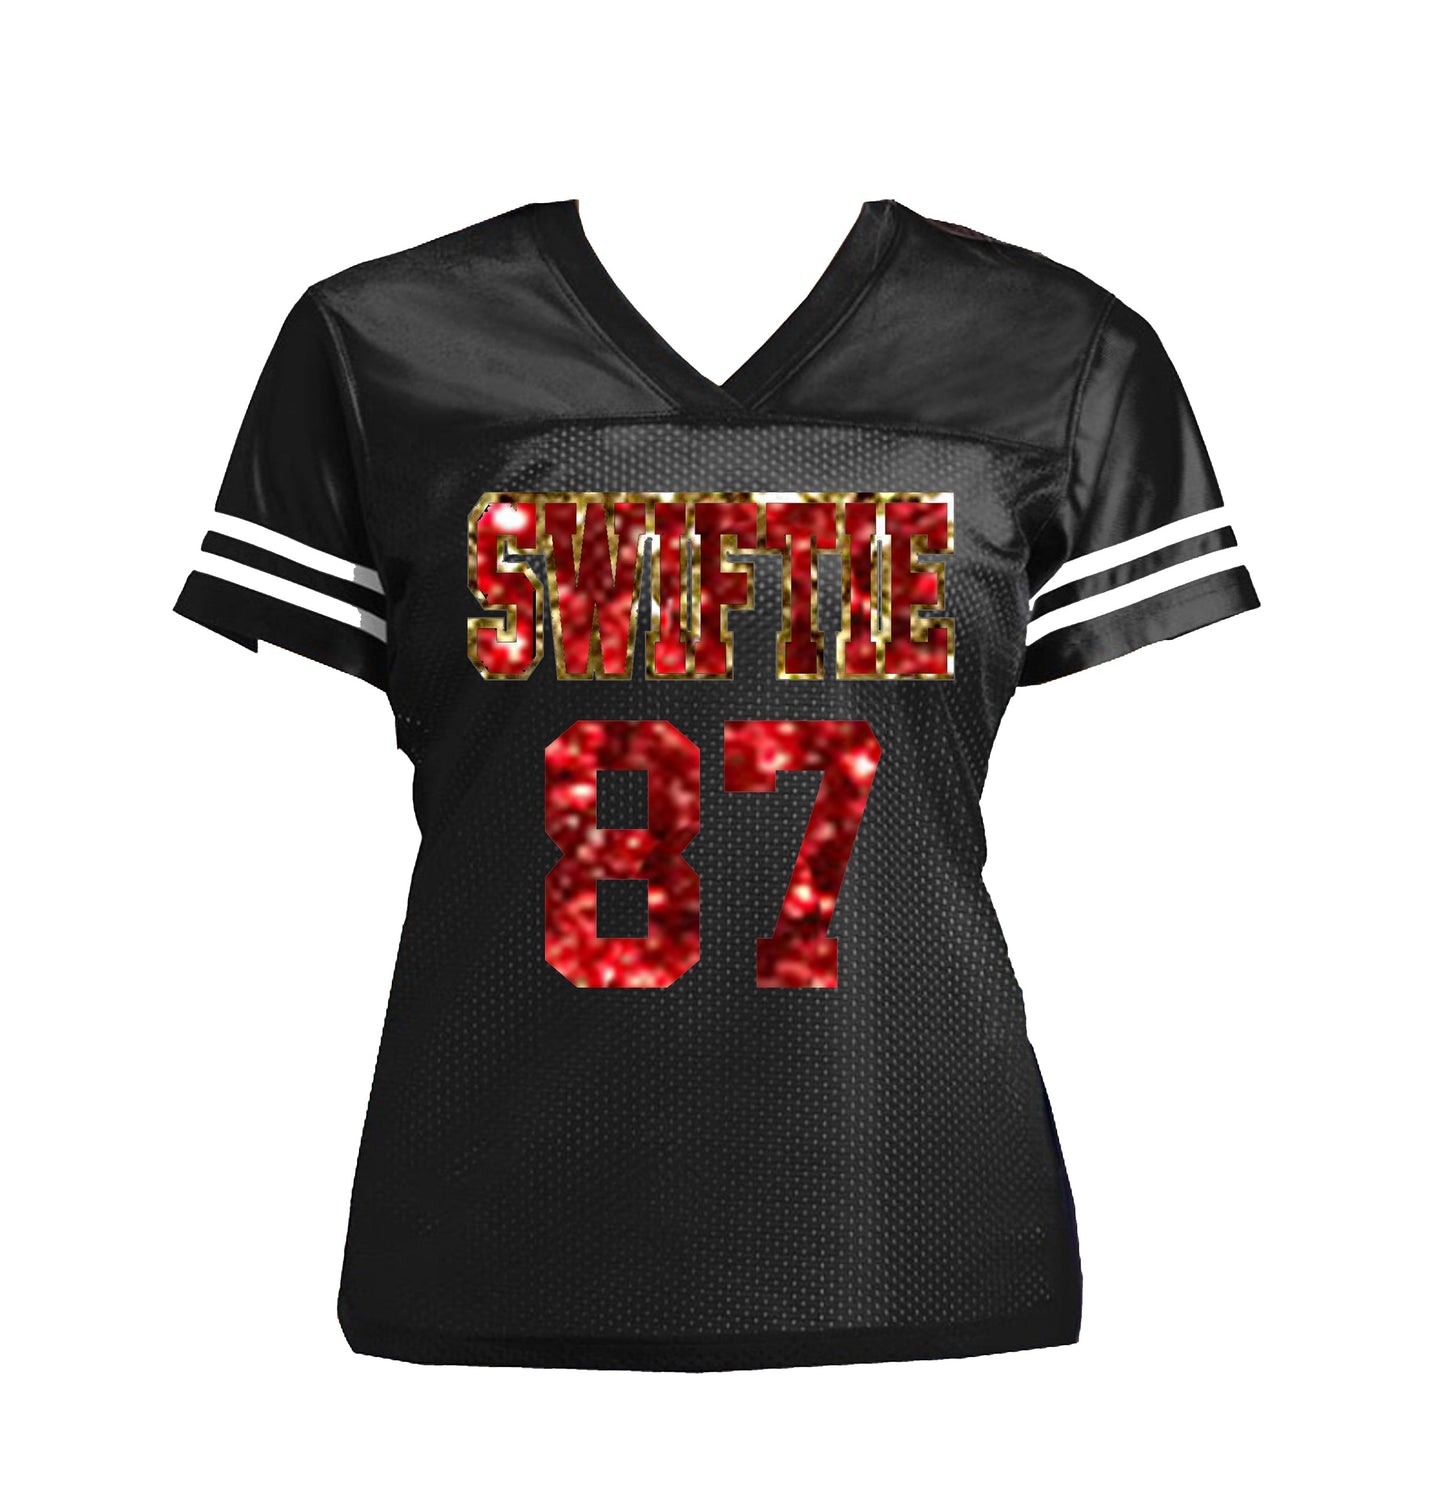 White Gold Red Swiftie 87 Glitter Football Jersey for Taylor Travis Kelce, Chiefs